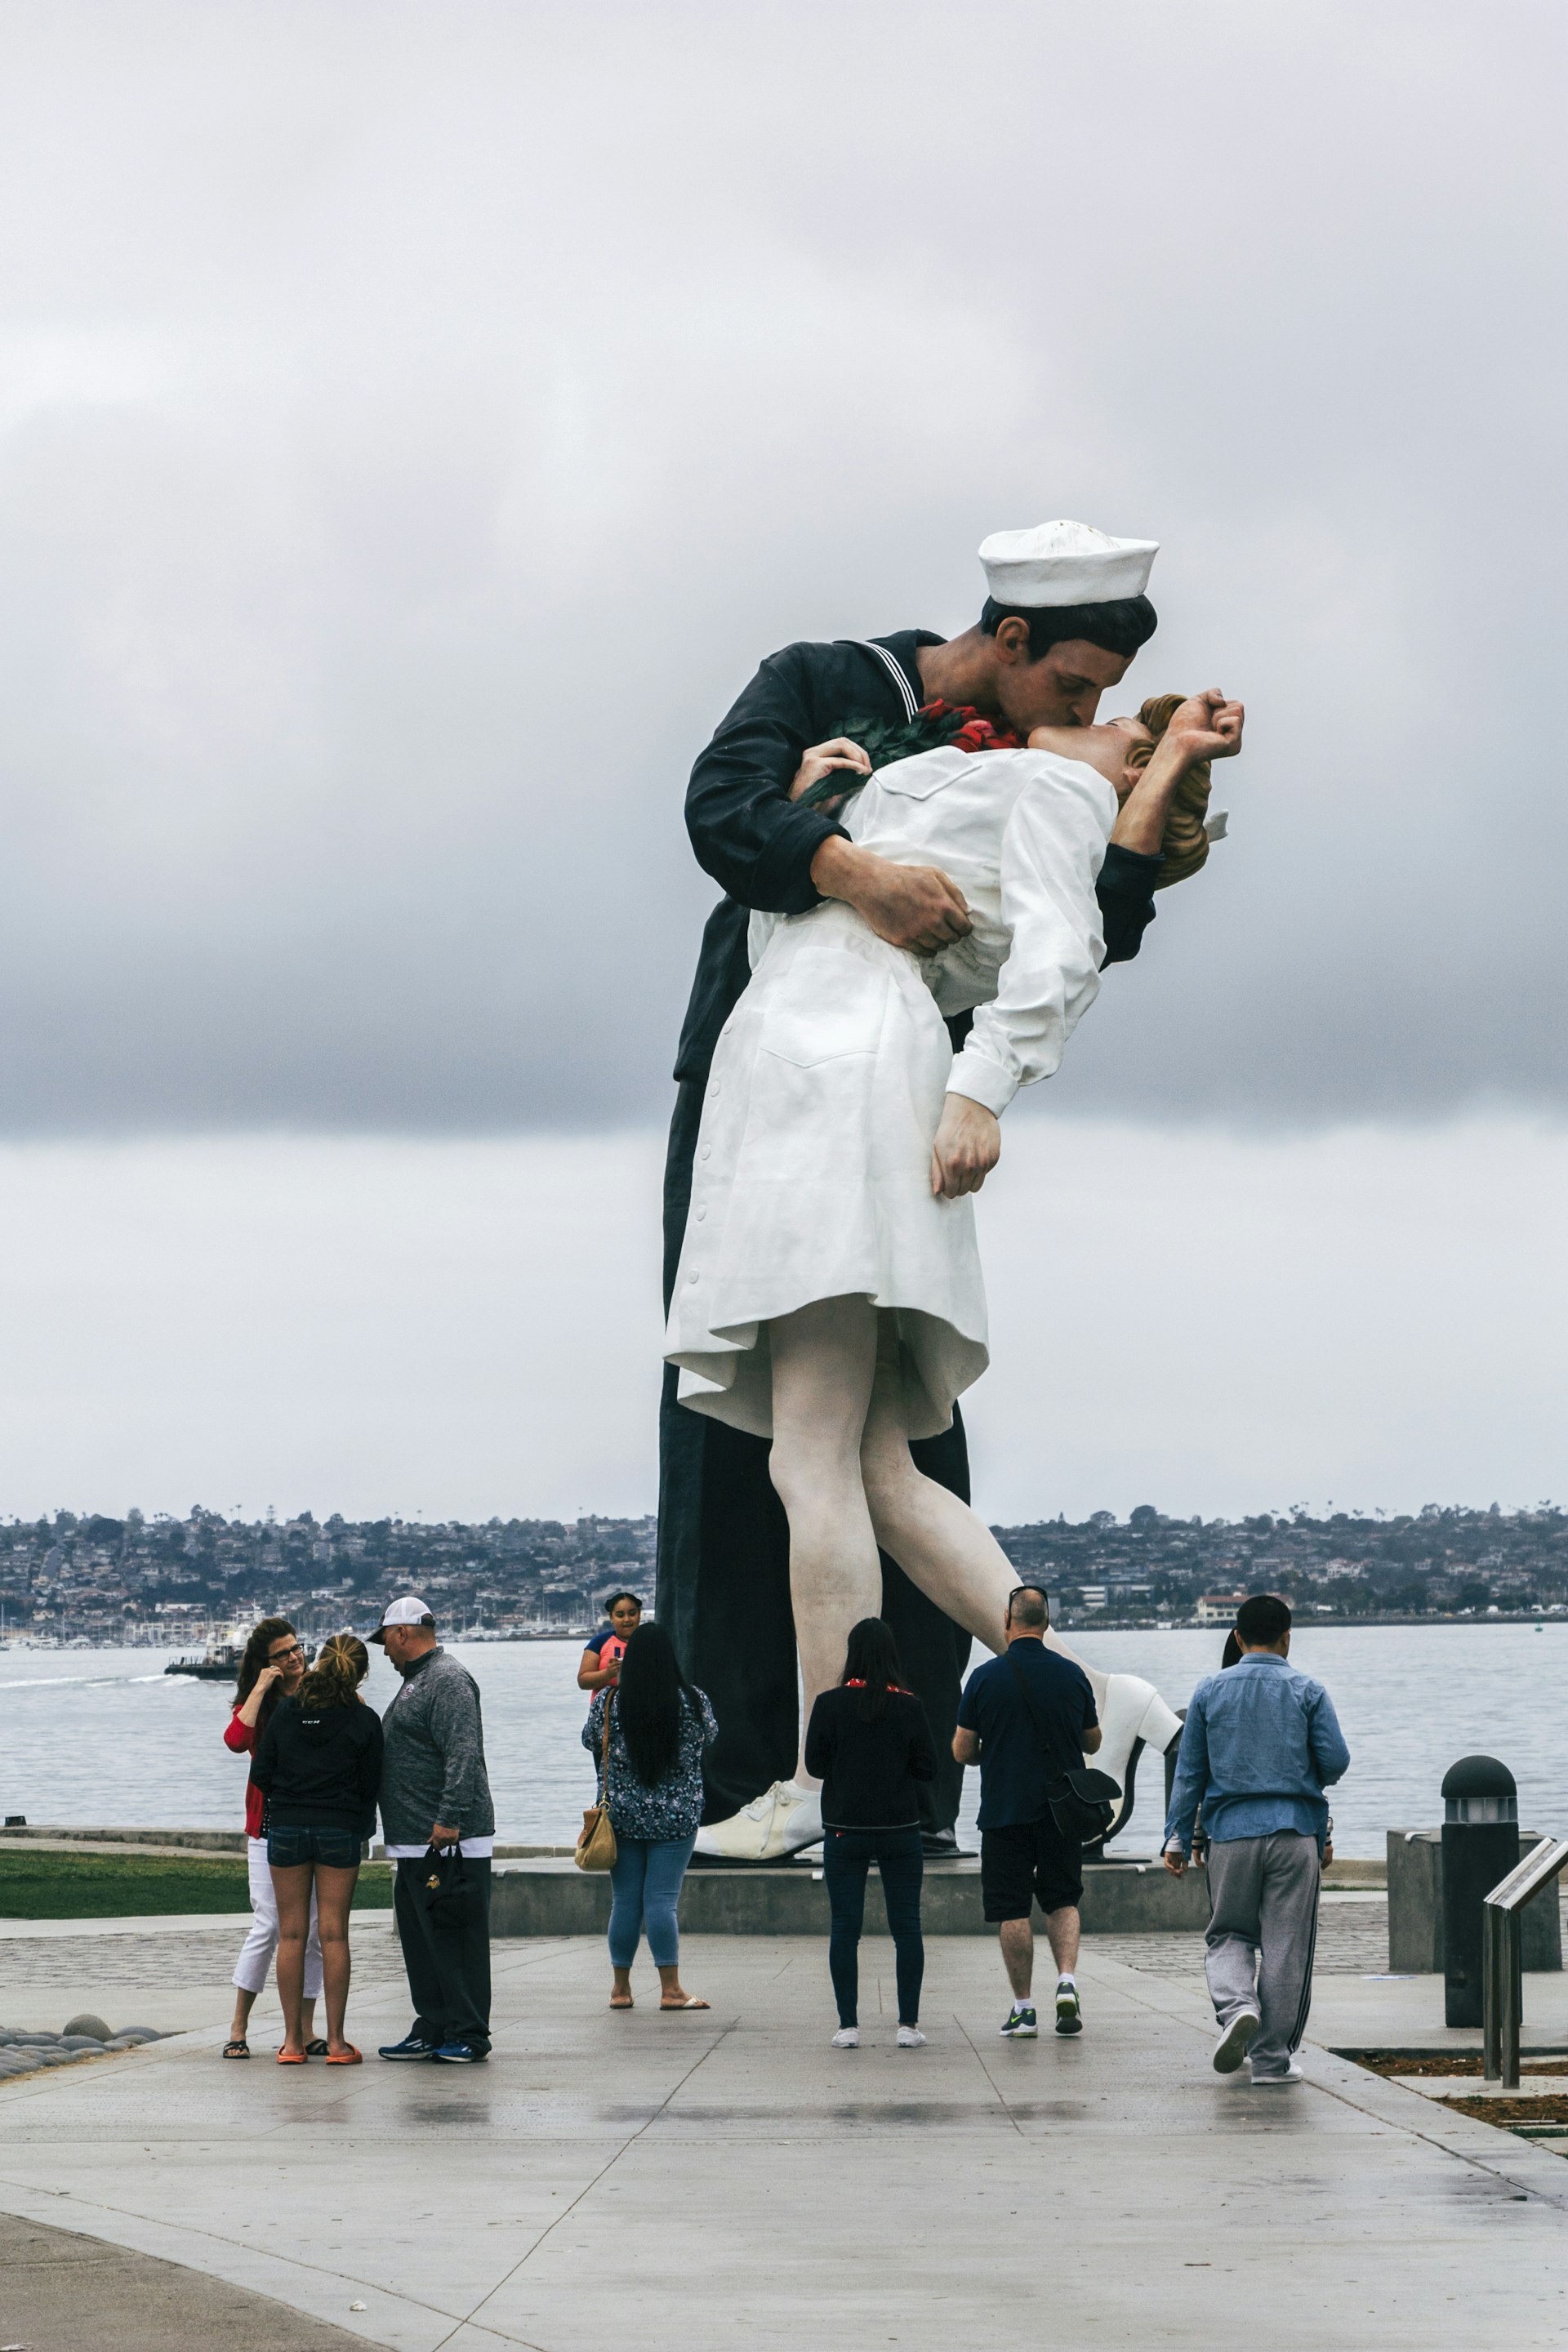 The Unconditional Surrender Statue in San Diego is of a sailor kissing a woman